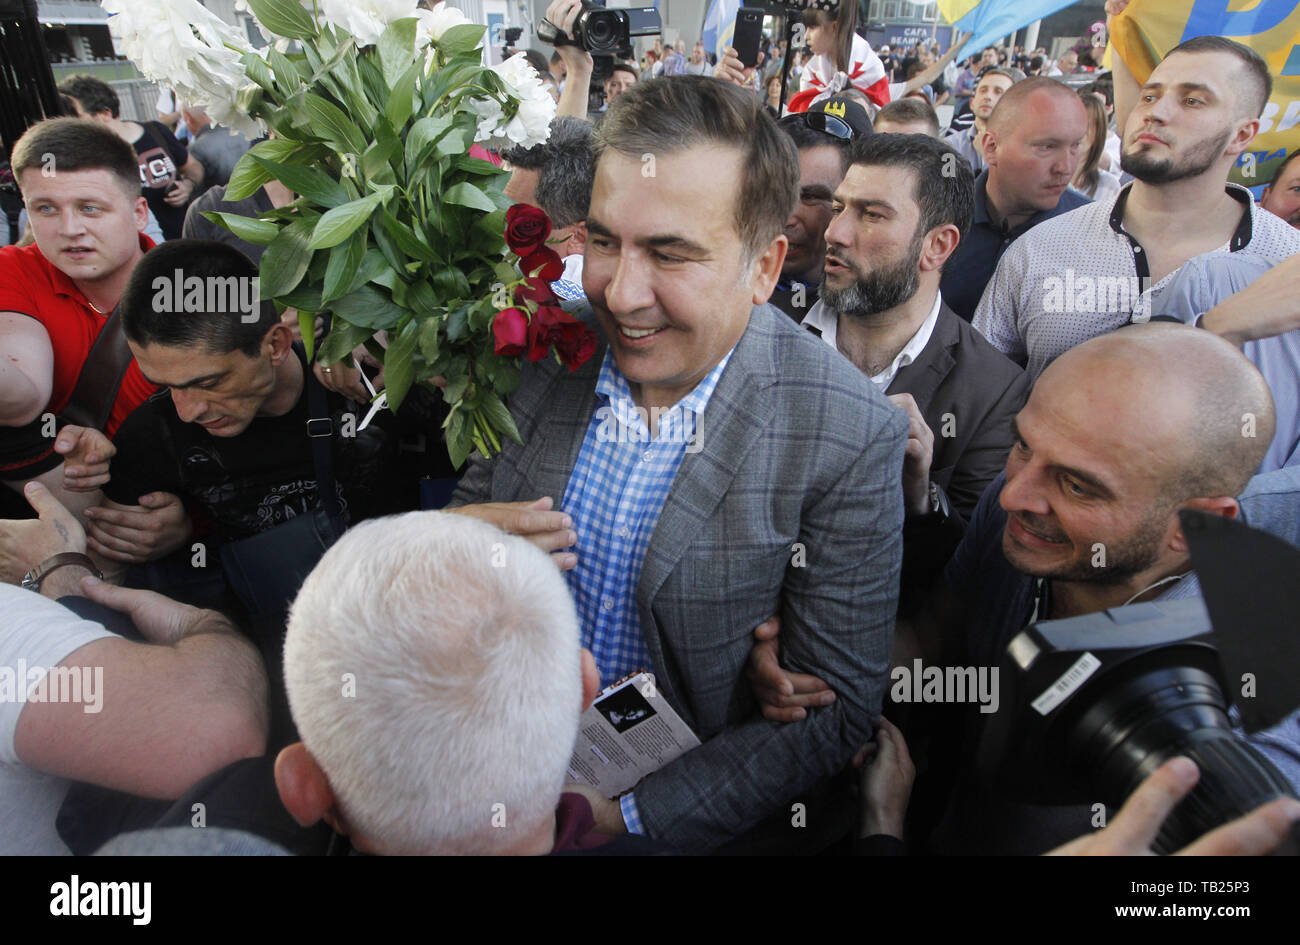 May 29, 2019 - Kiev, Ukraine - Former Georgian president and ex-Odessa Governor MIKHEIL SAAKASHVILI (C) walks as he arrives to the Boryspil international airport near Kiev, Ukraine, on 29 May 2019. Saakashvili returned to Ukraine after Ukrainian President Volodymyr Zelensky has reinstated Mikheil Saakashvili's Ukrainian citizenship on 28 May 2019. Zelensky deleted the respective provision from his predecessor Petro Poroshenko's No. 196 order dated July 26, 2017, the UNIAN inform agency reported. Ukrainian opposition leader Mikheil Saakashvili was deported to Poland on 12 February 2018, the Ukr Stock Photo